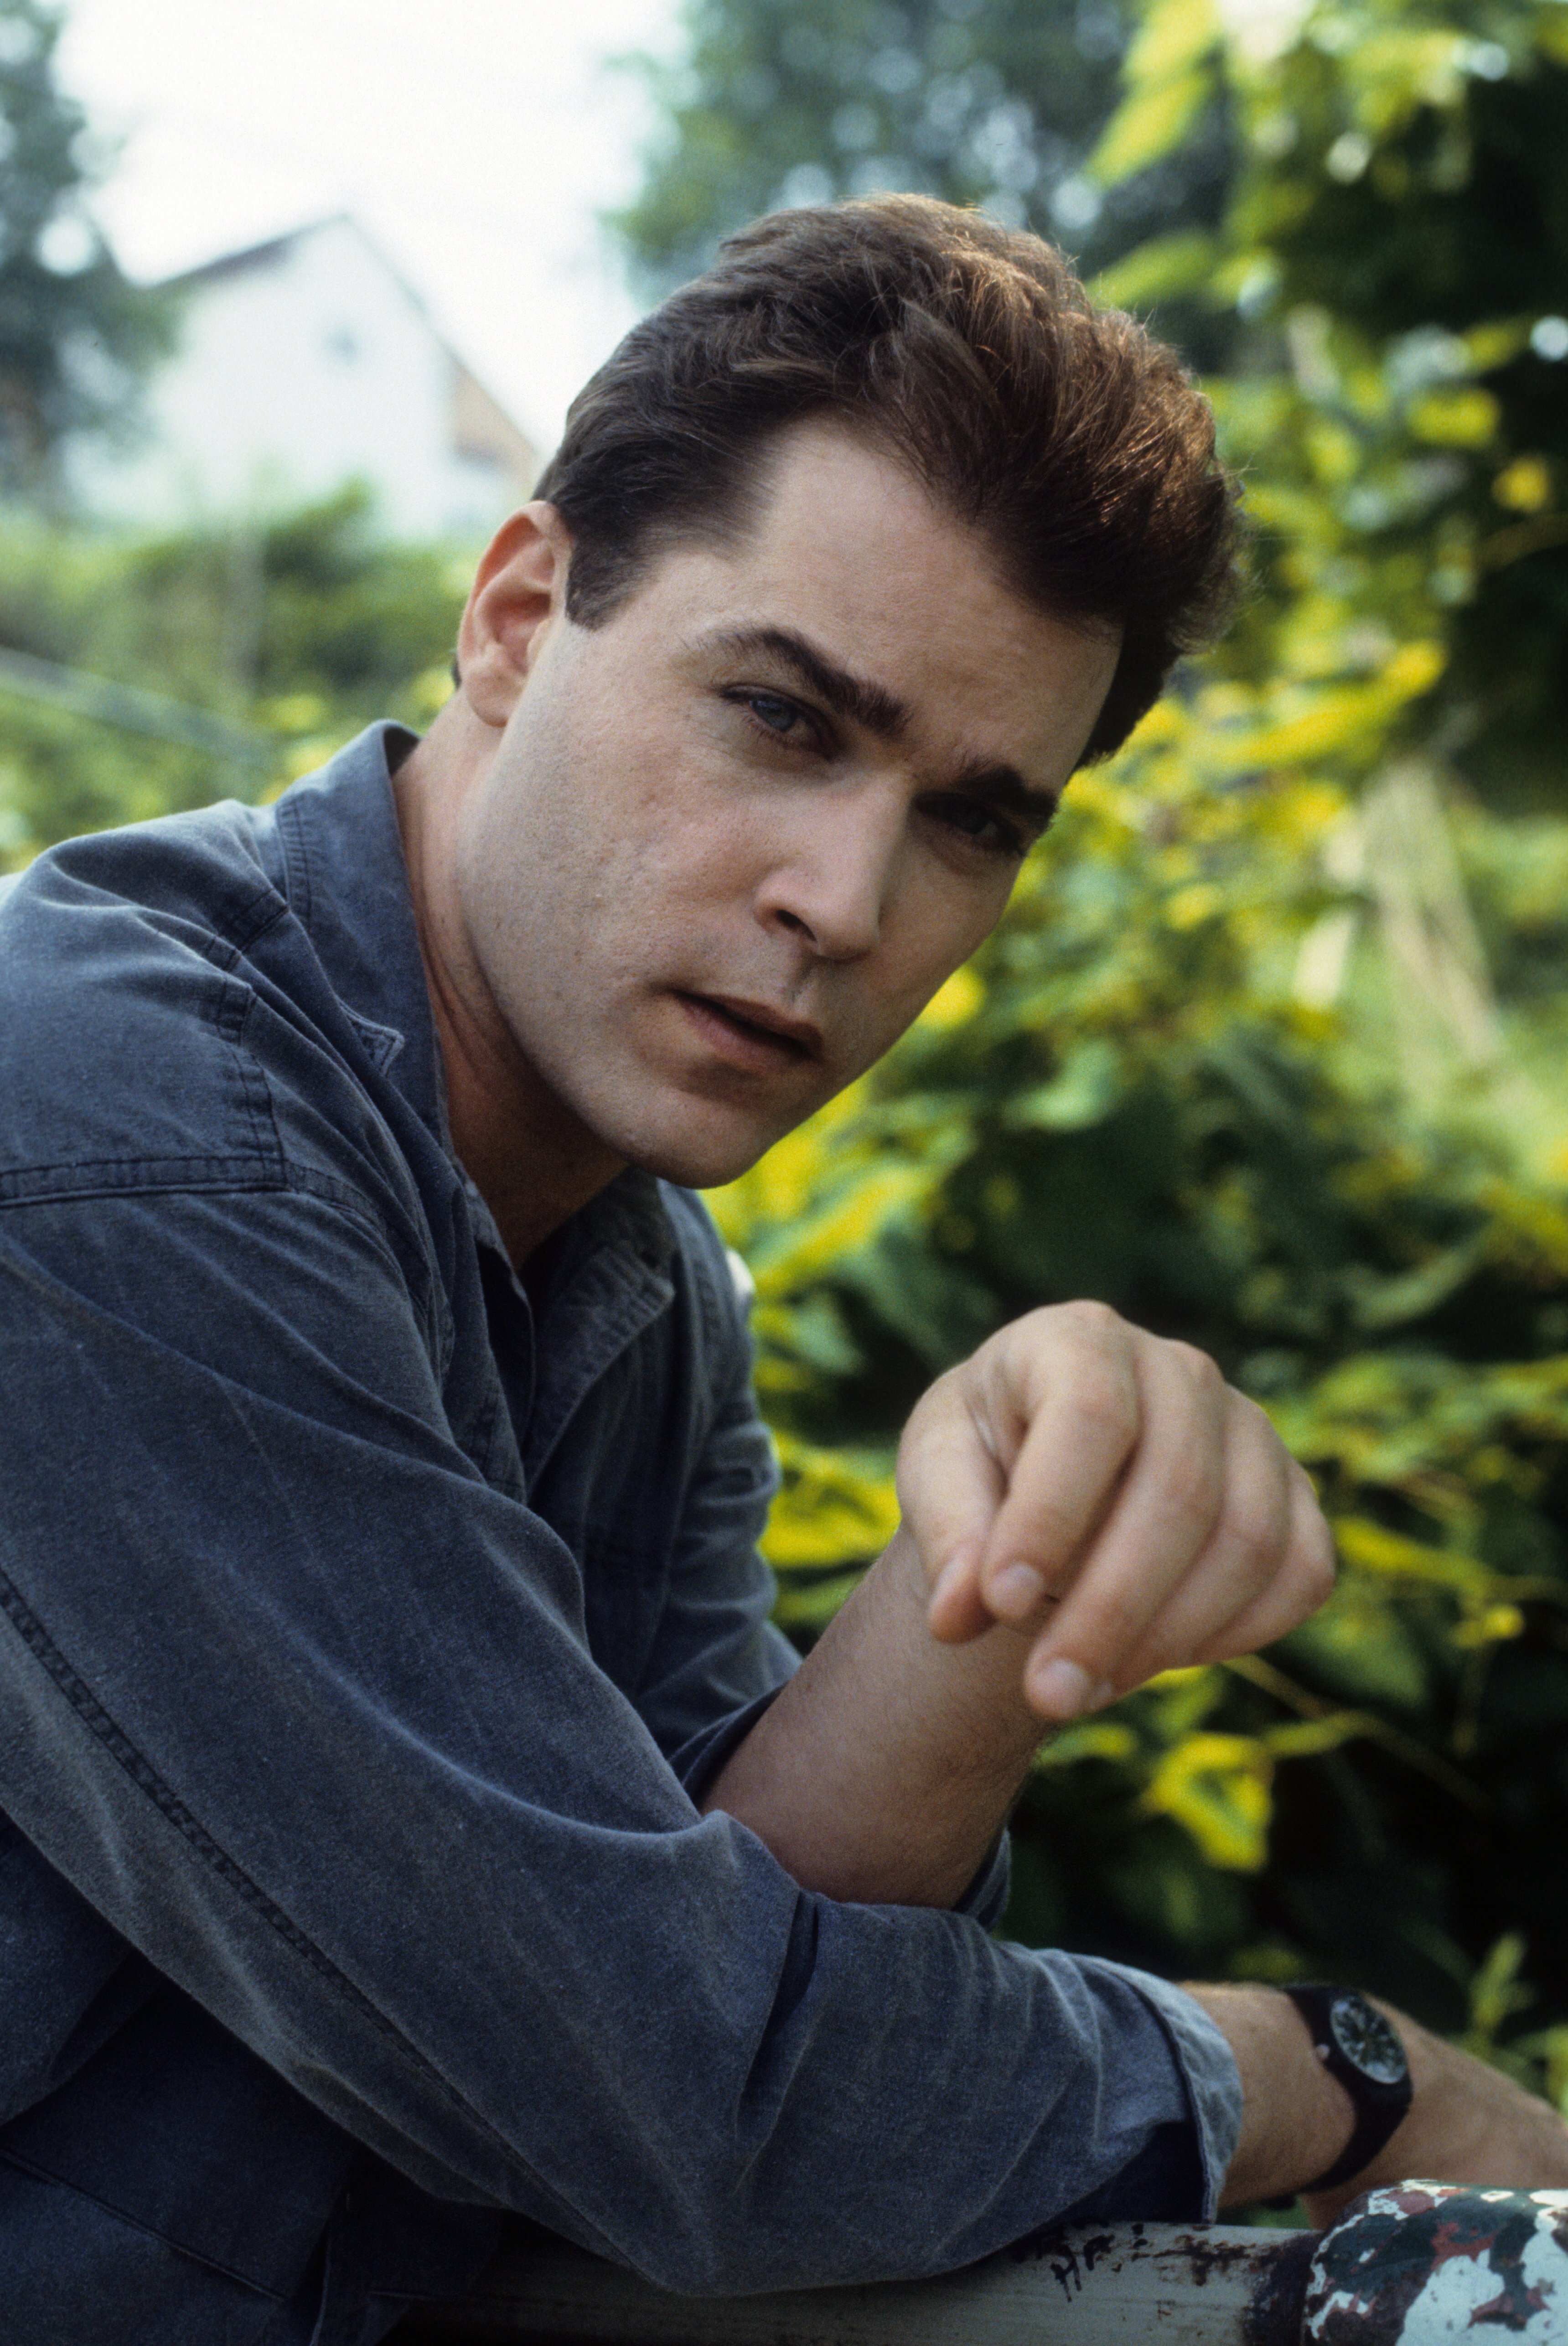 Ray Liotta posing outside in a scene from the film "Dominick and Eugene," in 1988. | Source: Orion Pictures/Getty Images